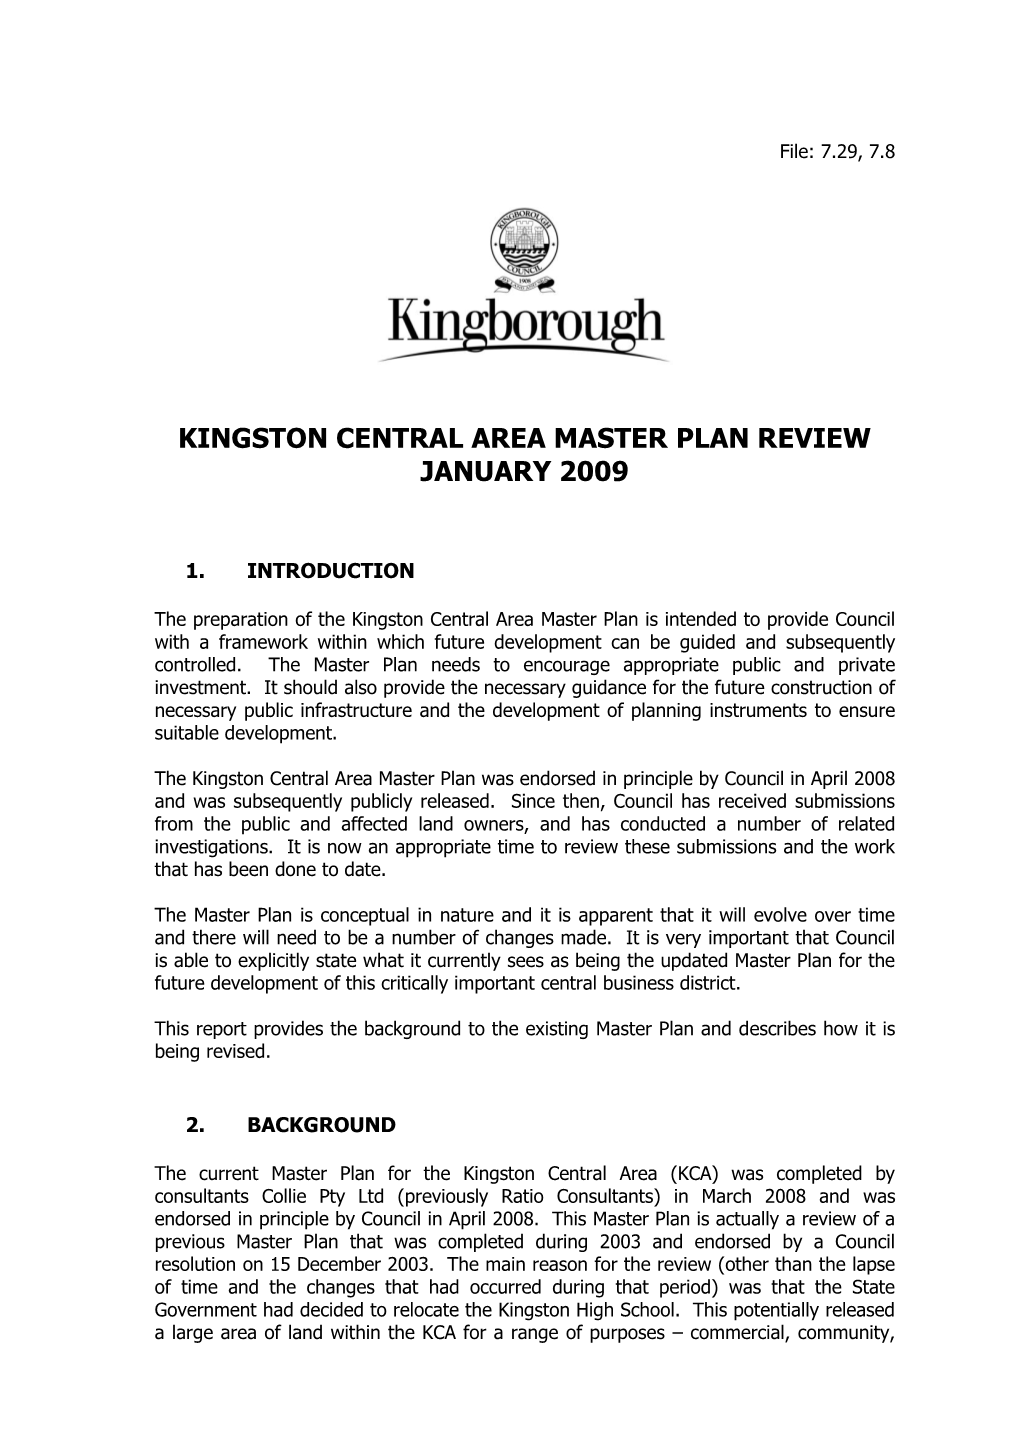 Report Provides the Background to the Existing Master Plan and Describes How It Is Being Revised